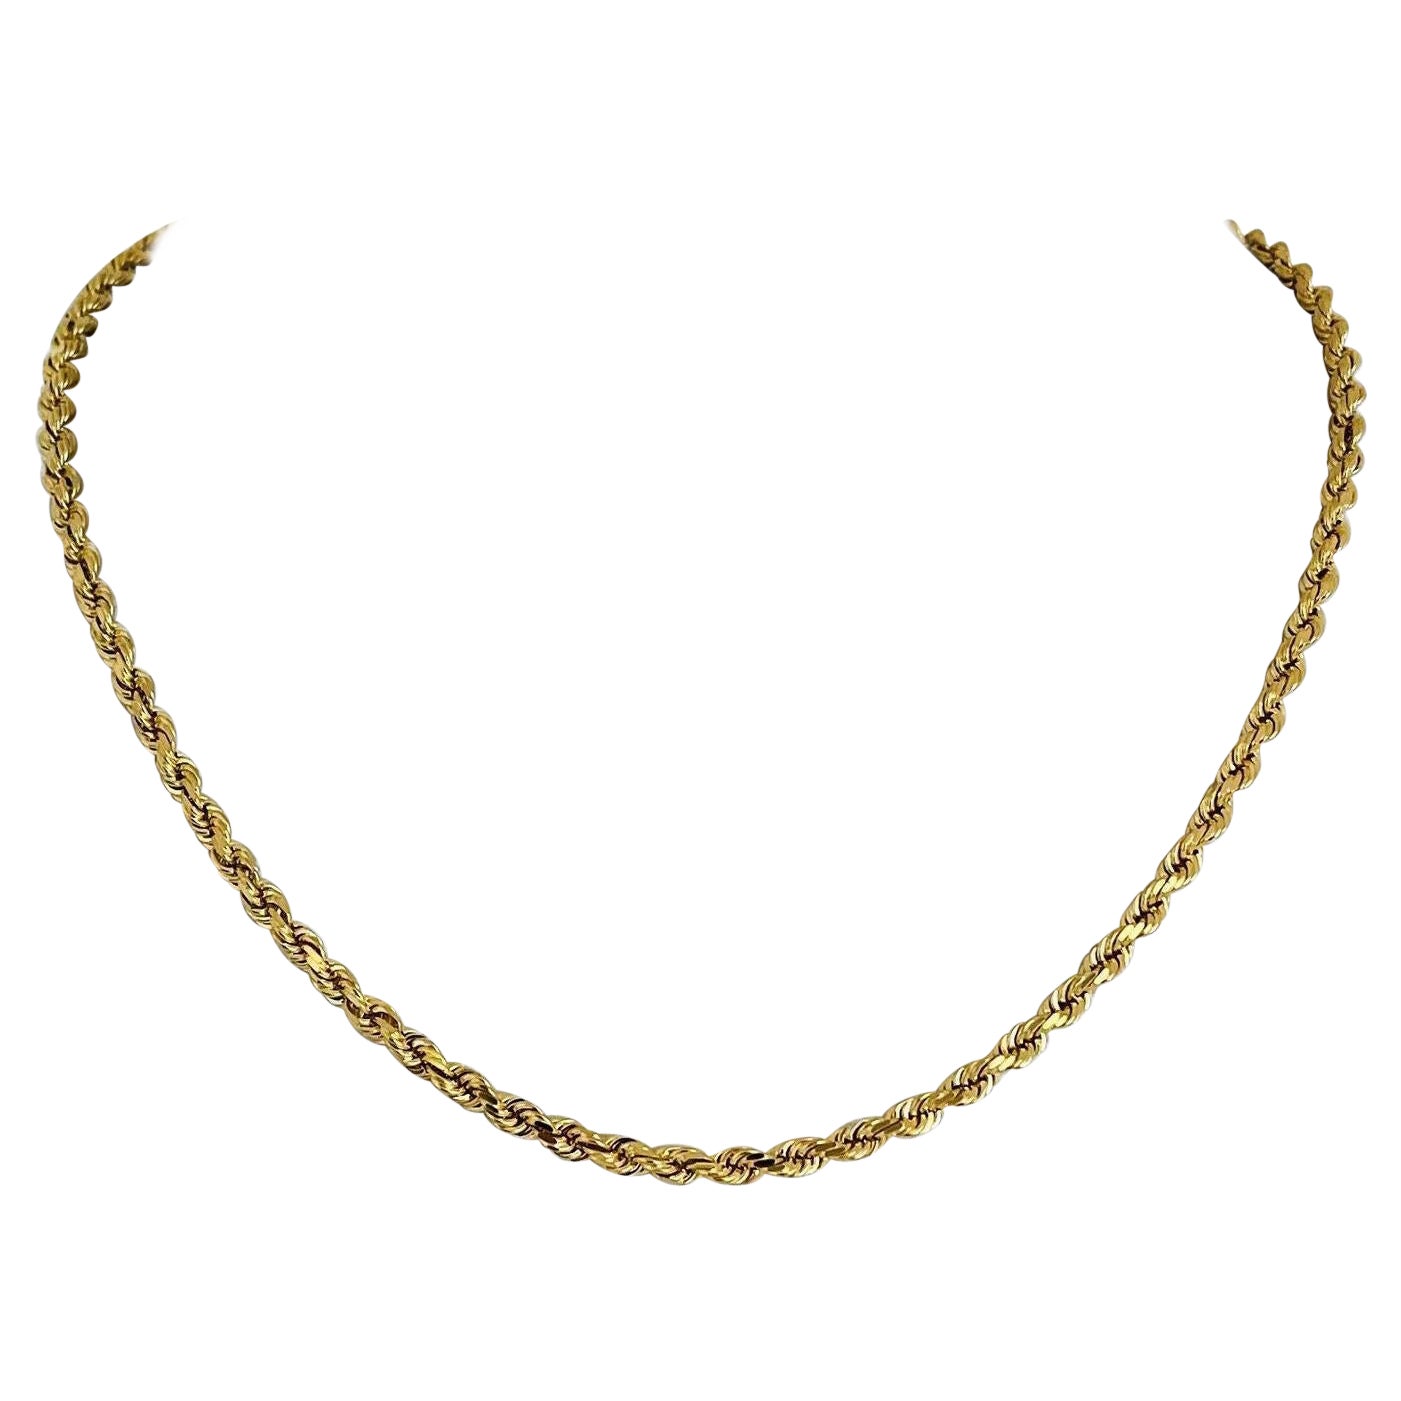 10 Karat Yellow Gold Solid Diamond Cut Rope Chain Necklace